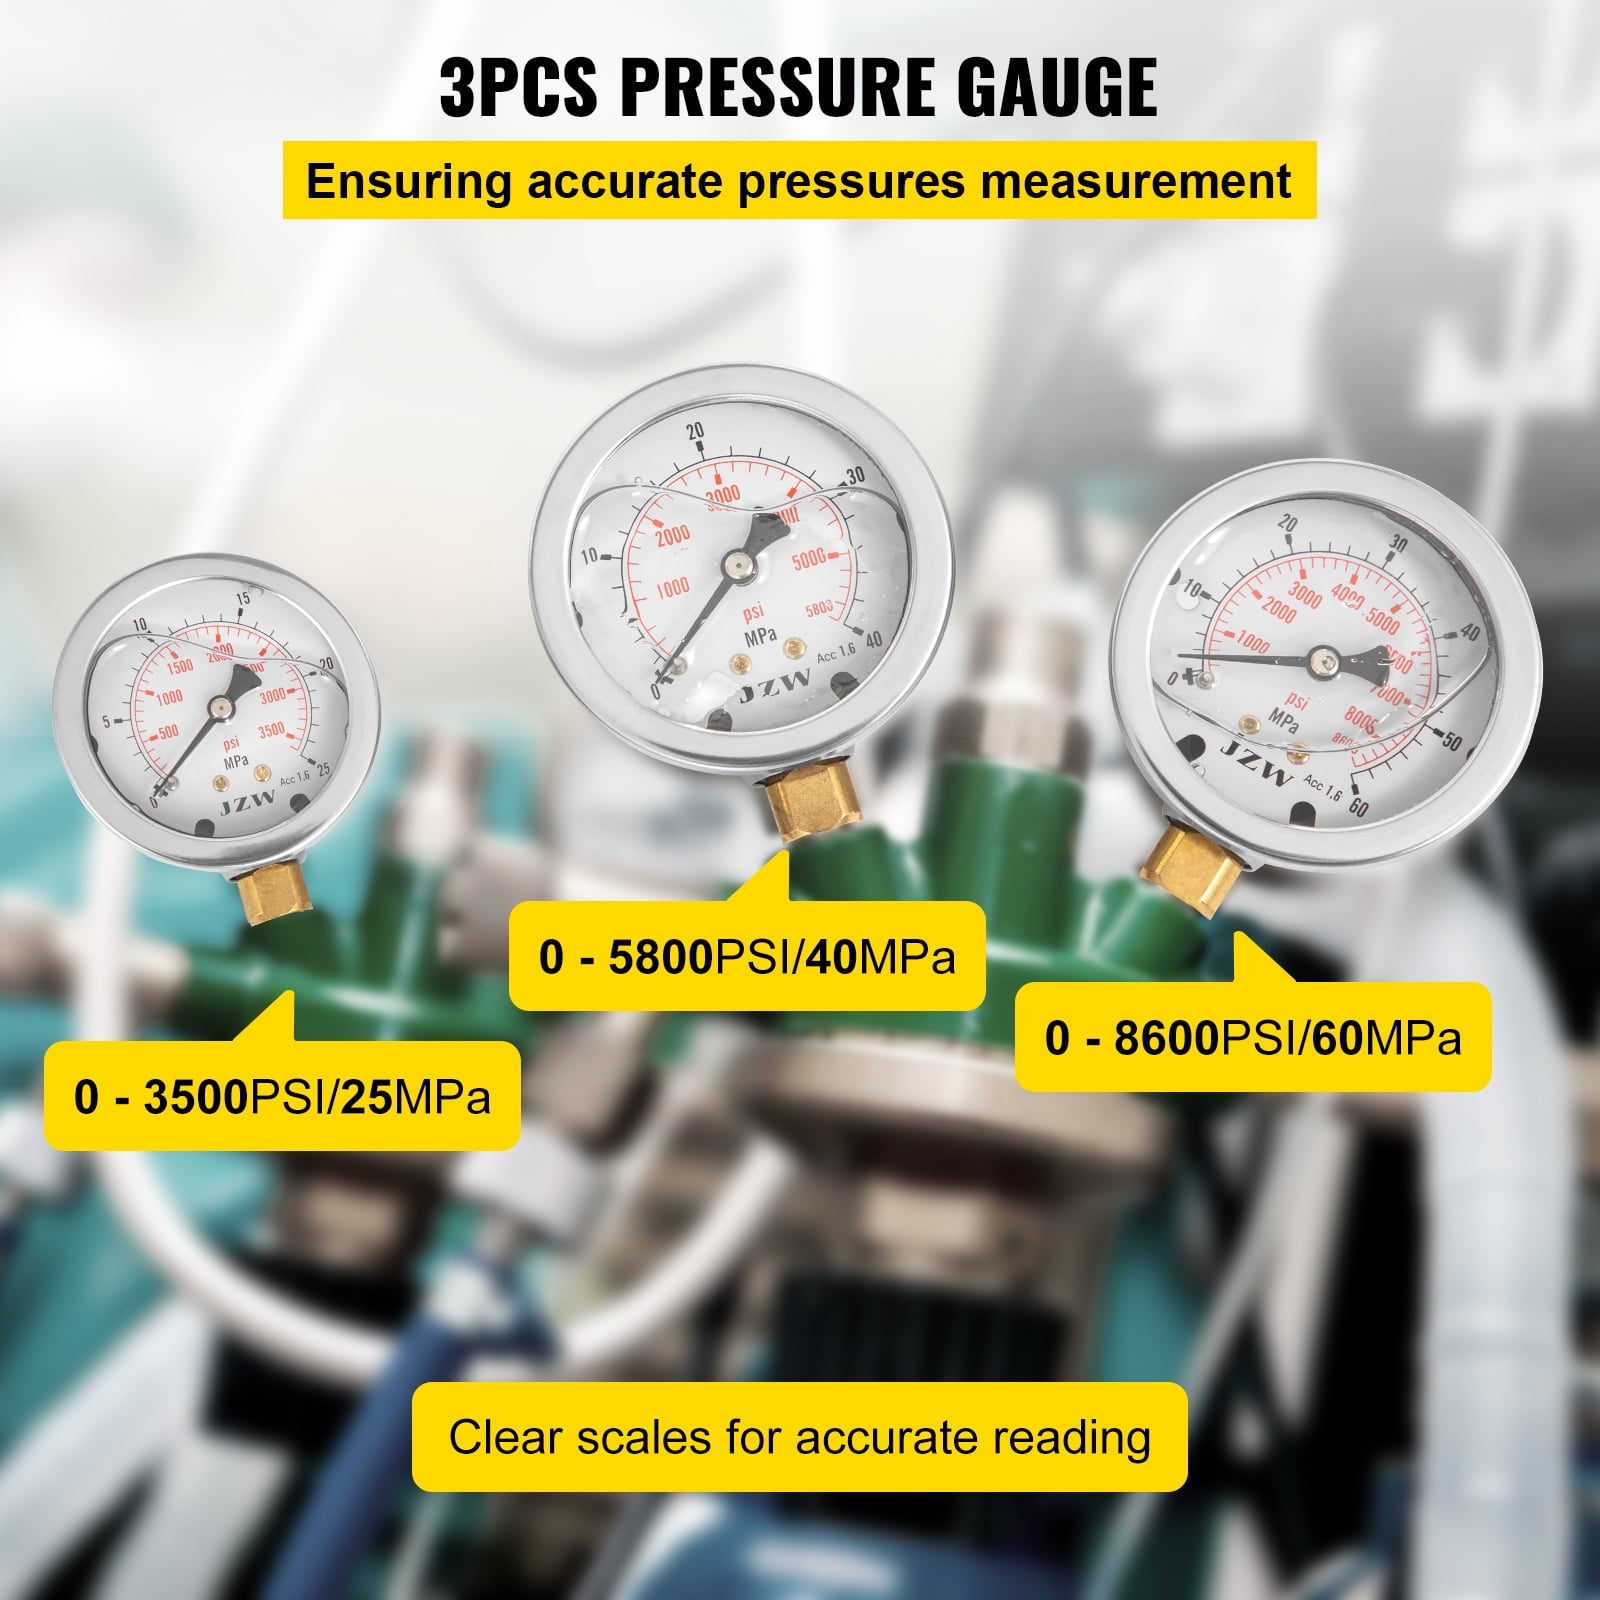 Details about   Pressure Gauge Portable Hydraulic Pressure Test Kit Hydraulic Equipment Tester 